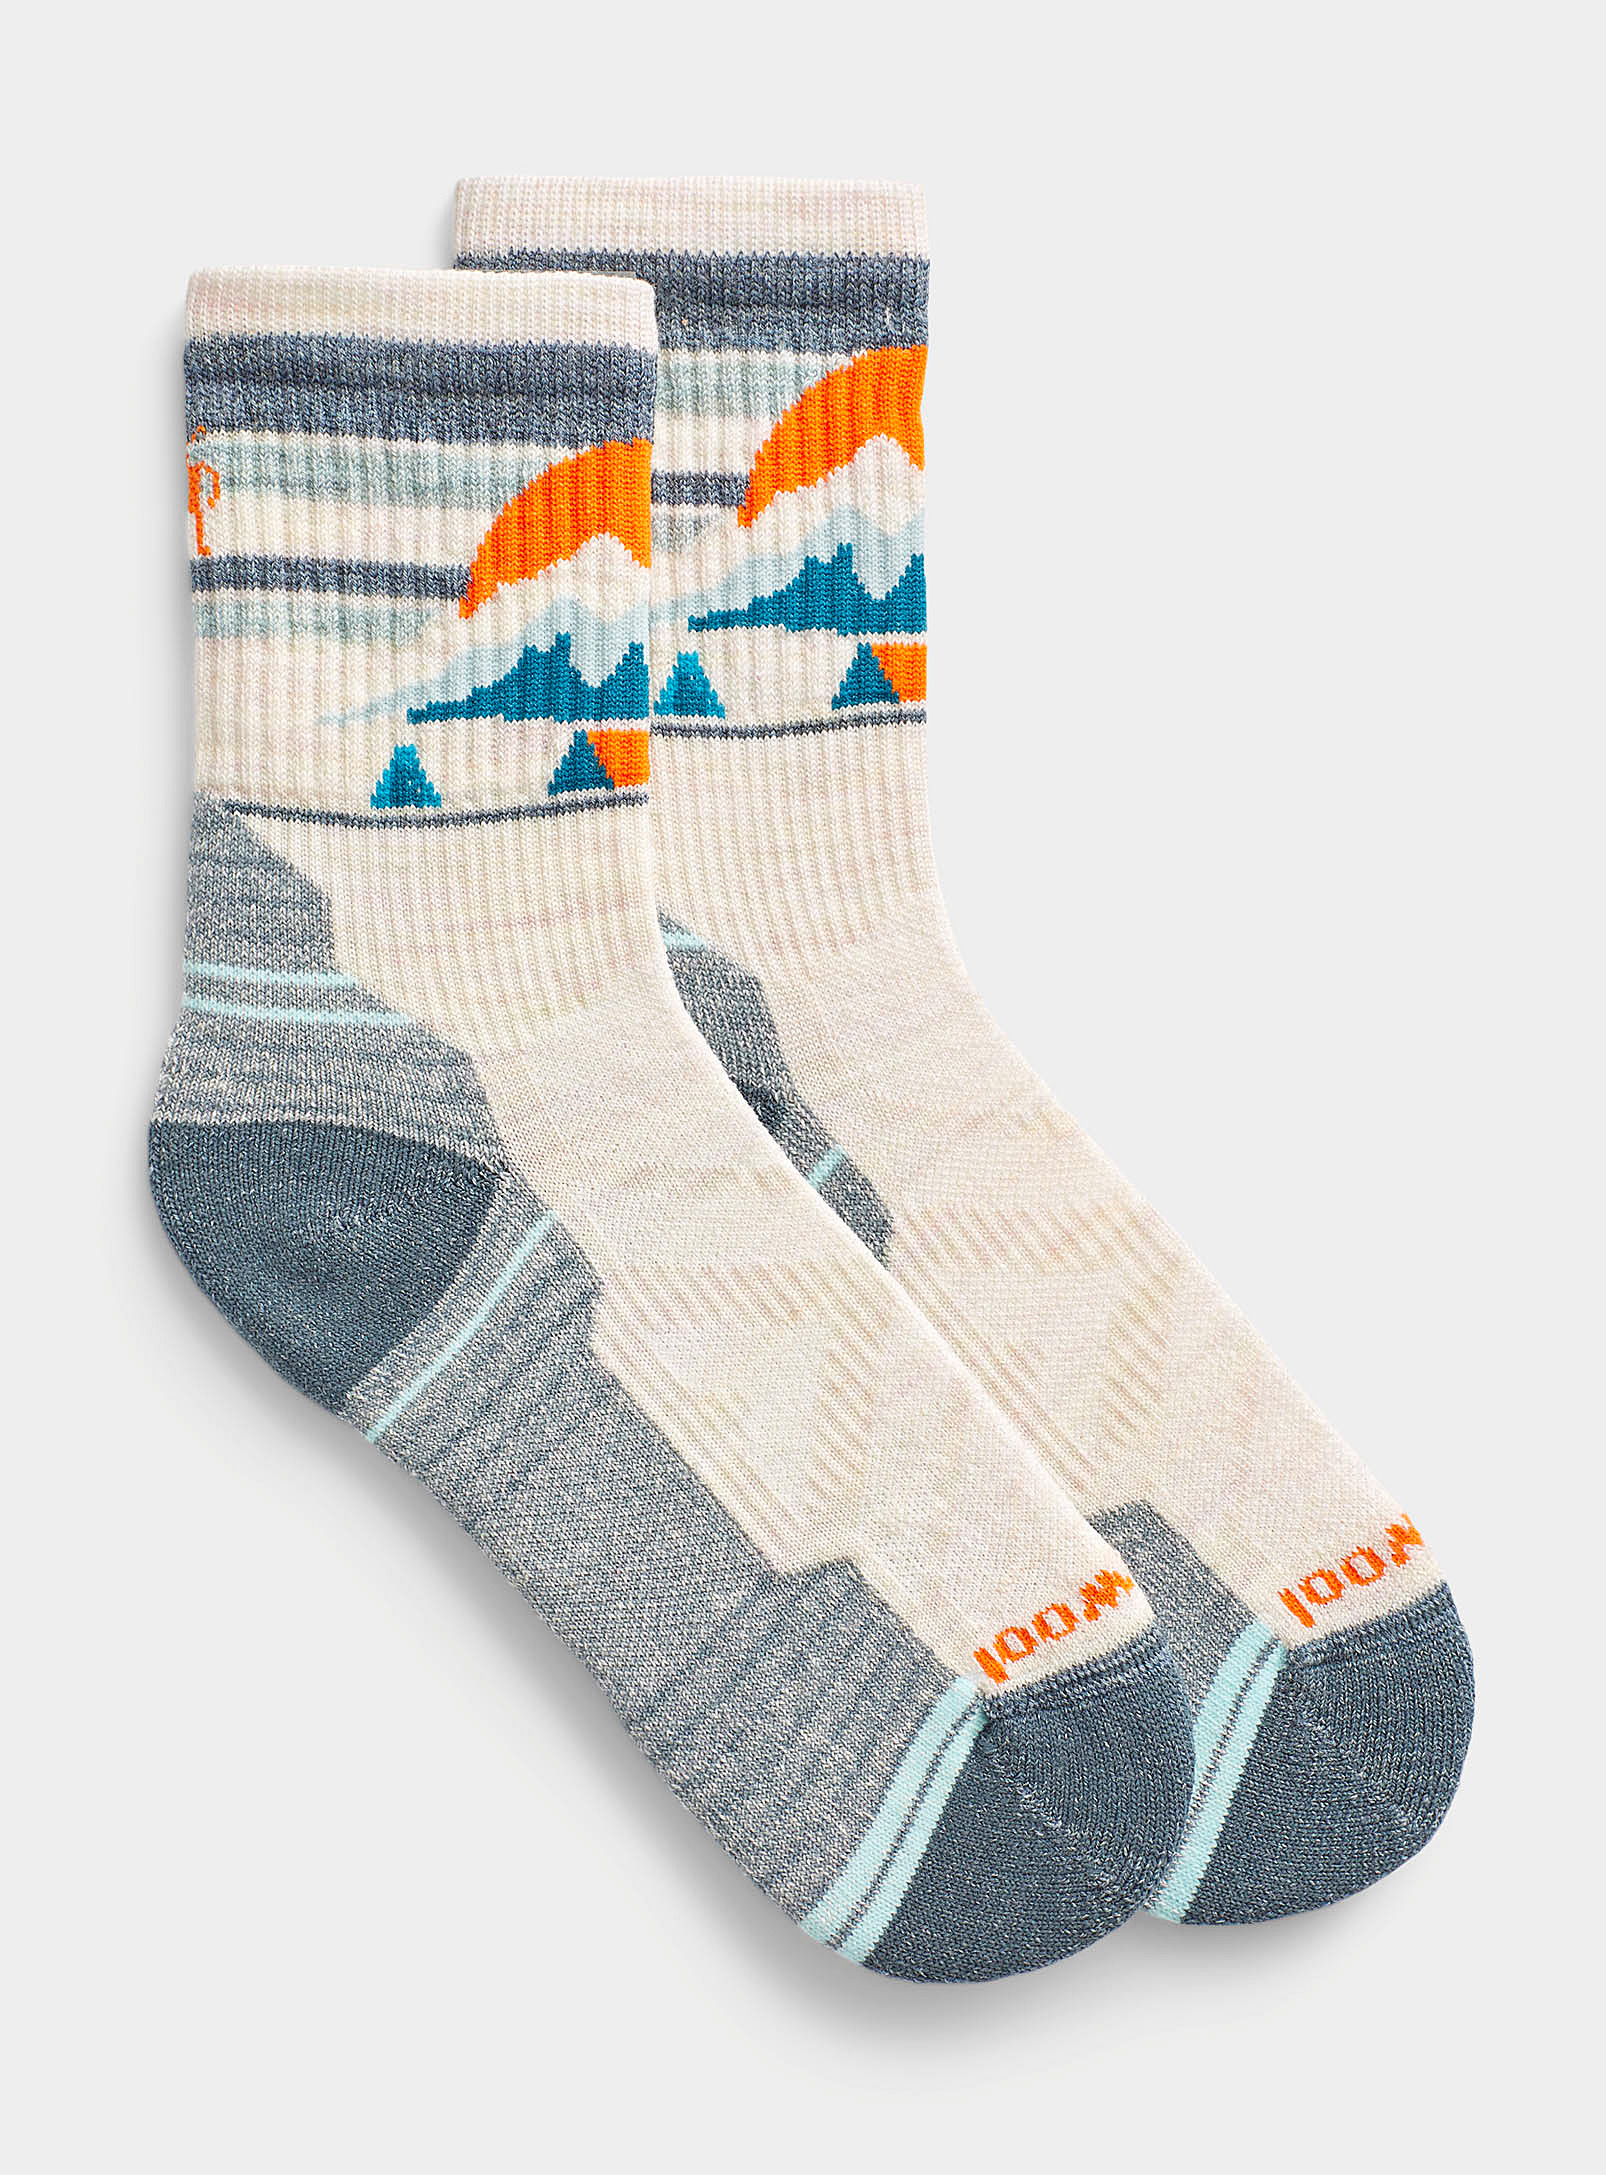 Smartwool Moonlight Camping Hiking Sock In Patterned White